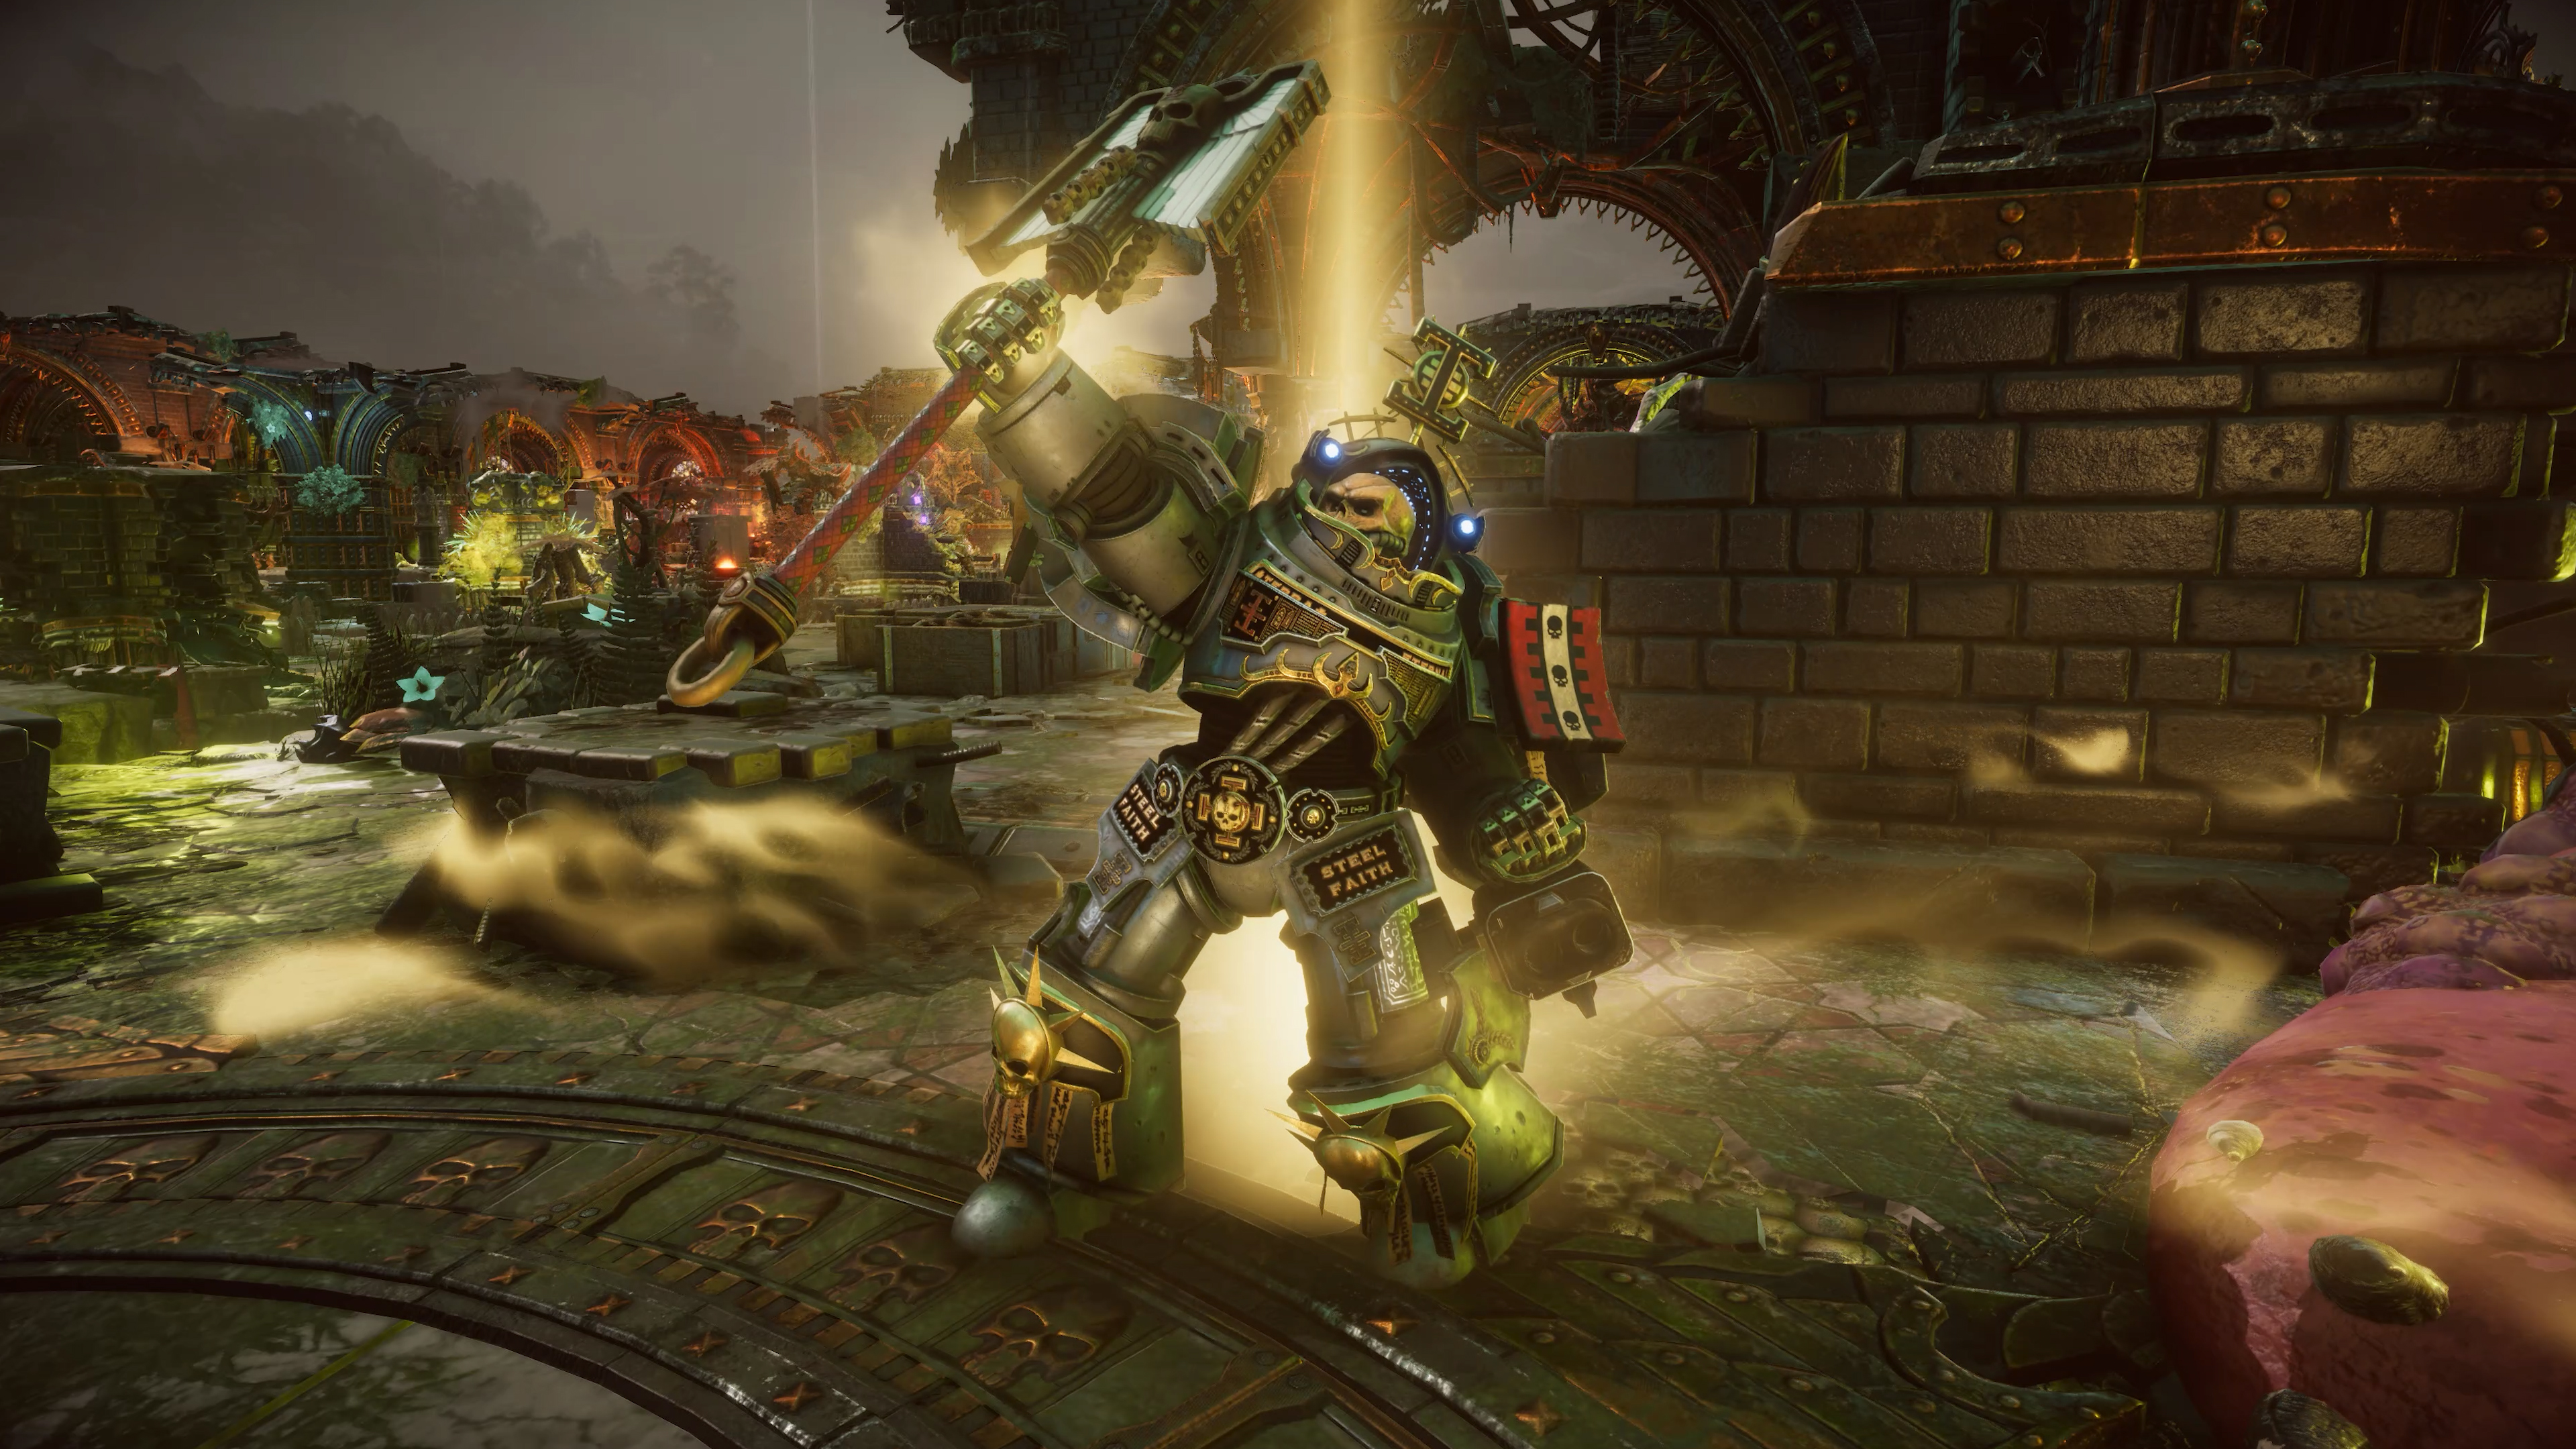  Frontier acquires the studio behind Warhammer 40K: Daemonhunters with an eye to 'more ambitious future titles' 